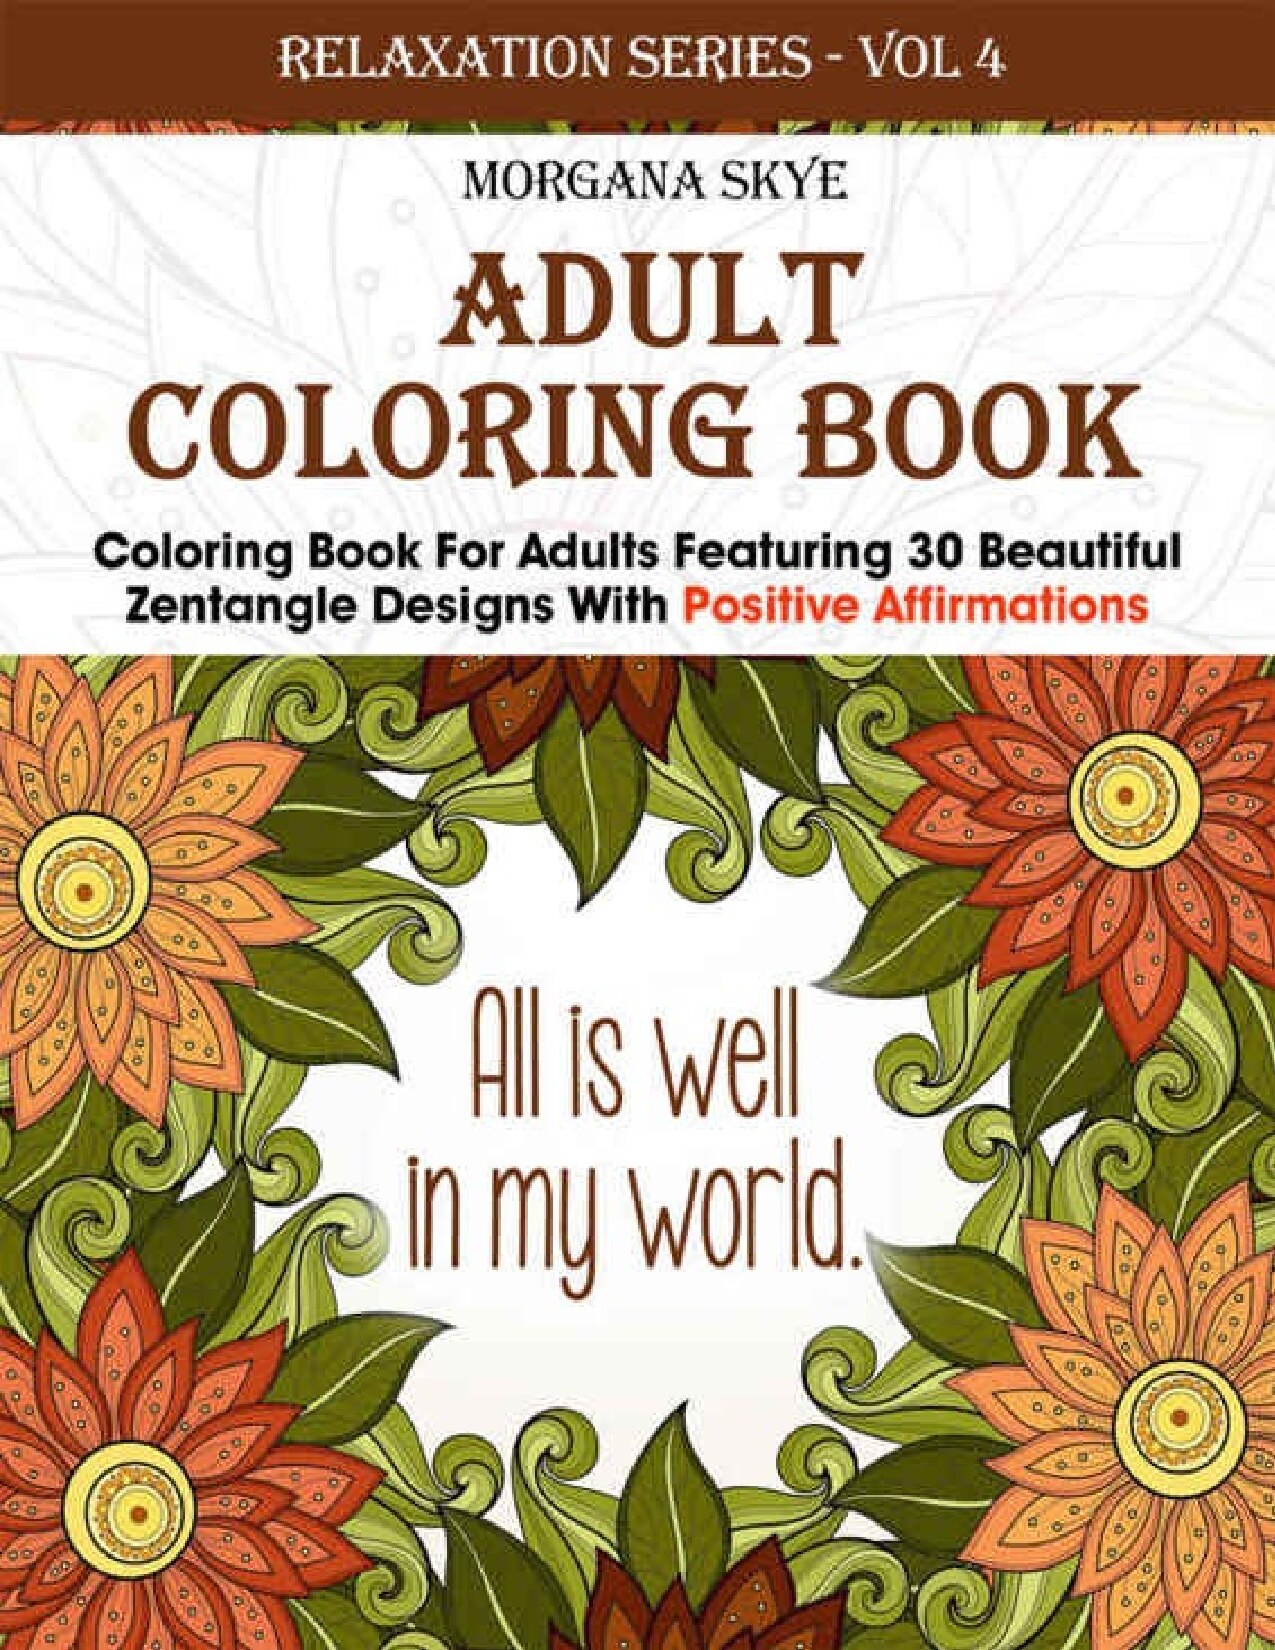 Adult Coloring Coloring For Adults Featuring 30 Destination and Travel Intricate Fun Designs - PDFDrive.com